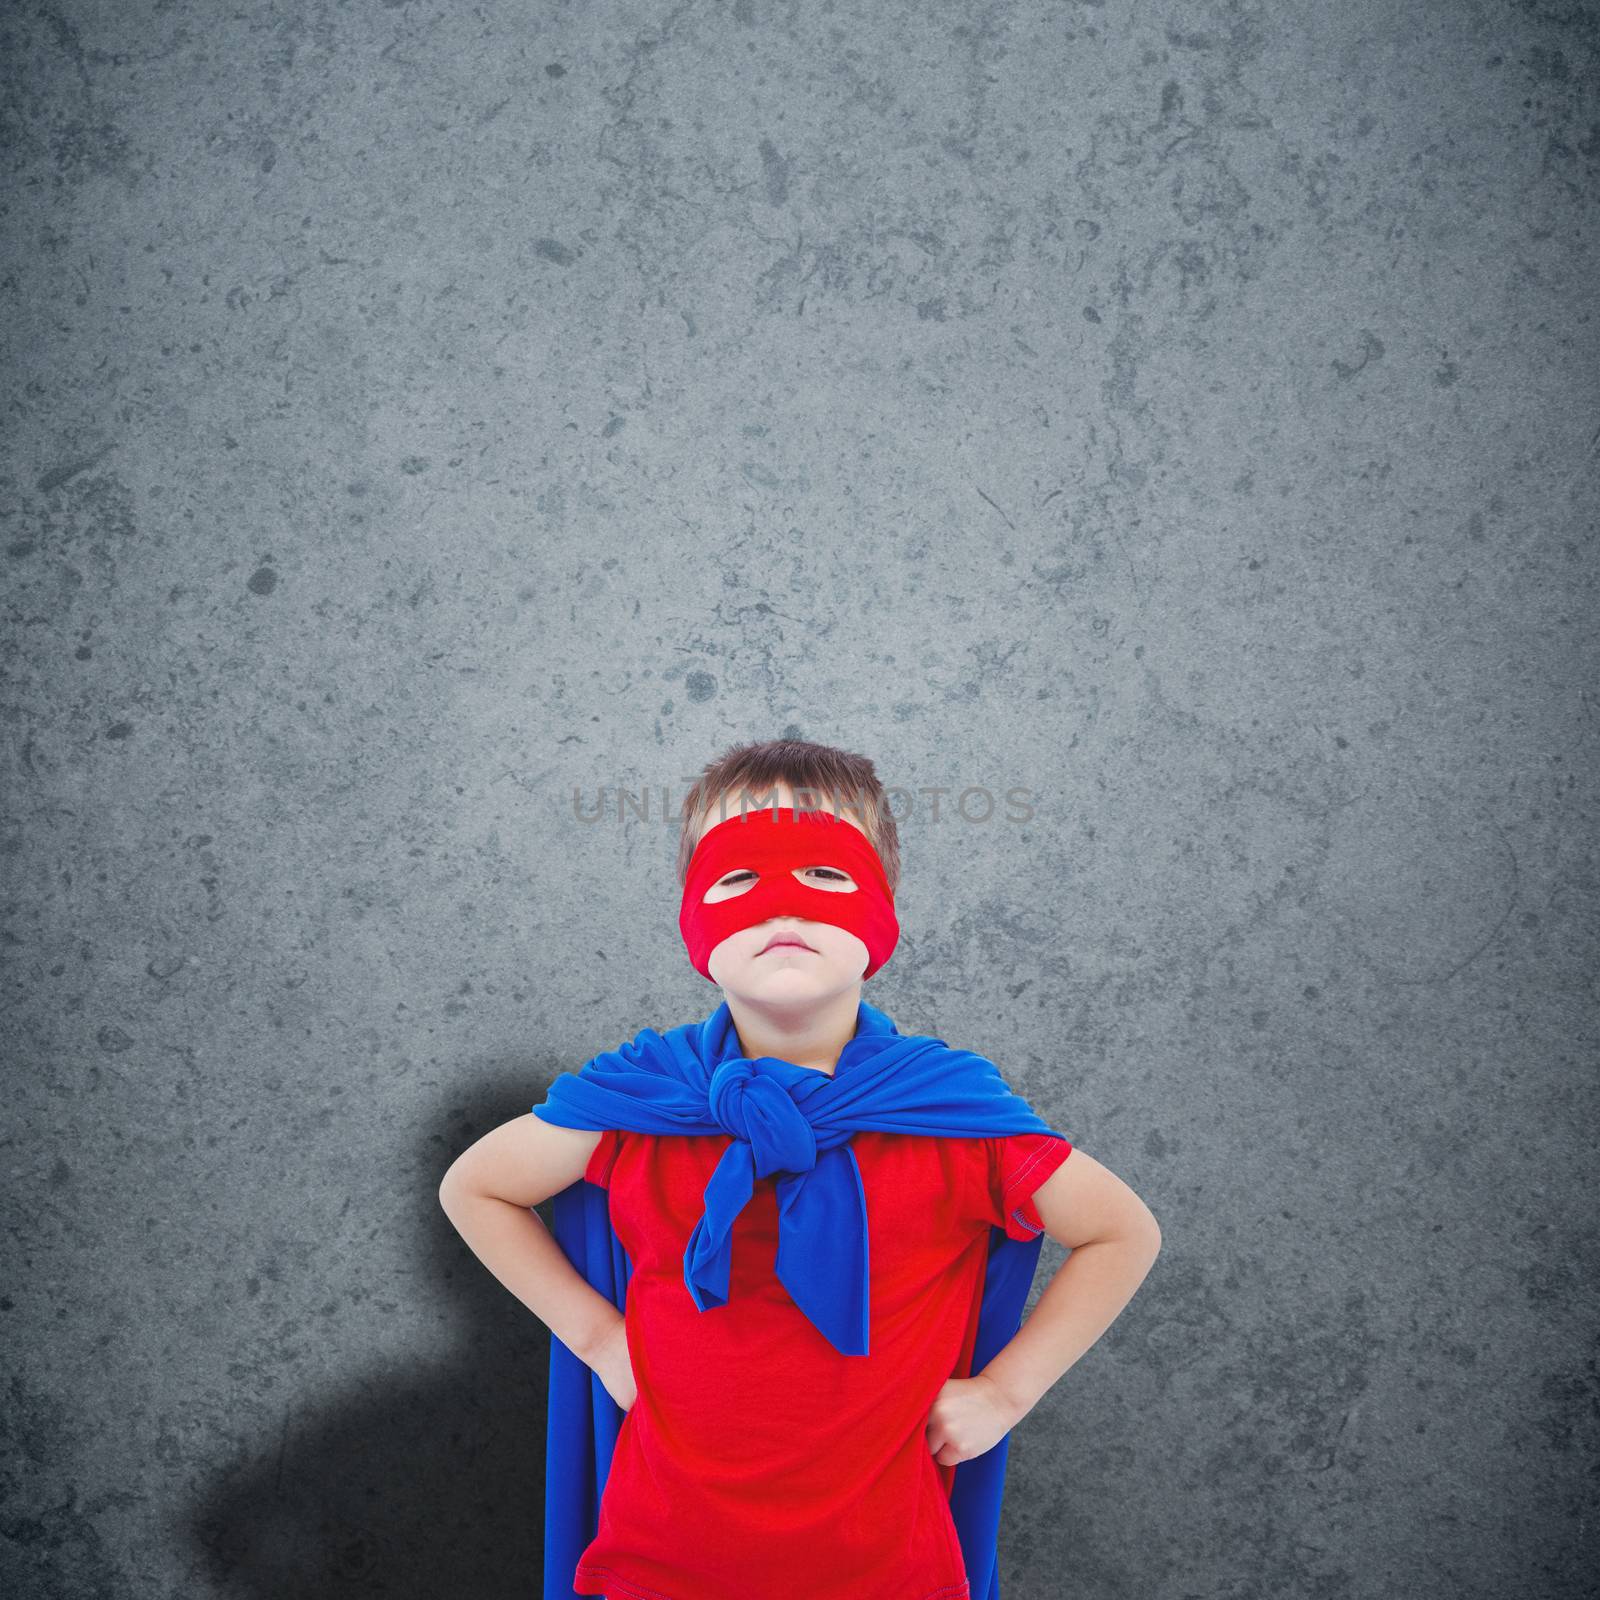 Masked boy pretending to be superhero against dirty old wall background